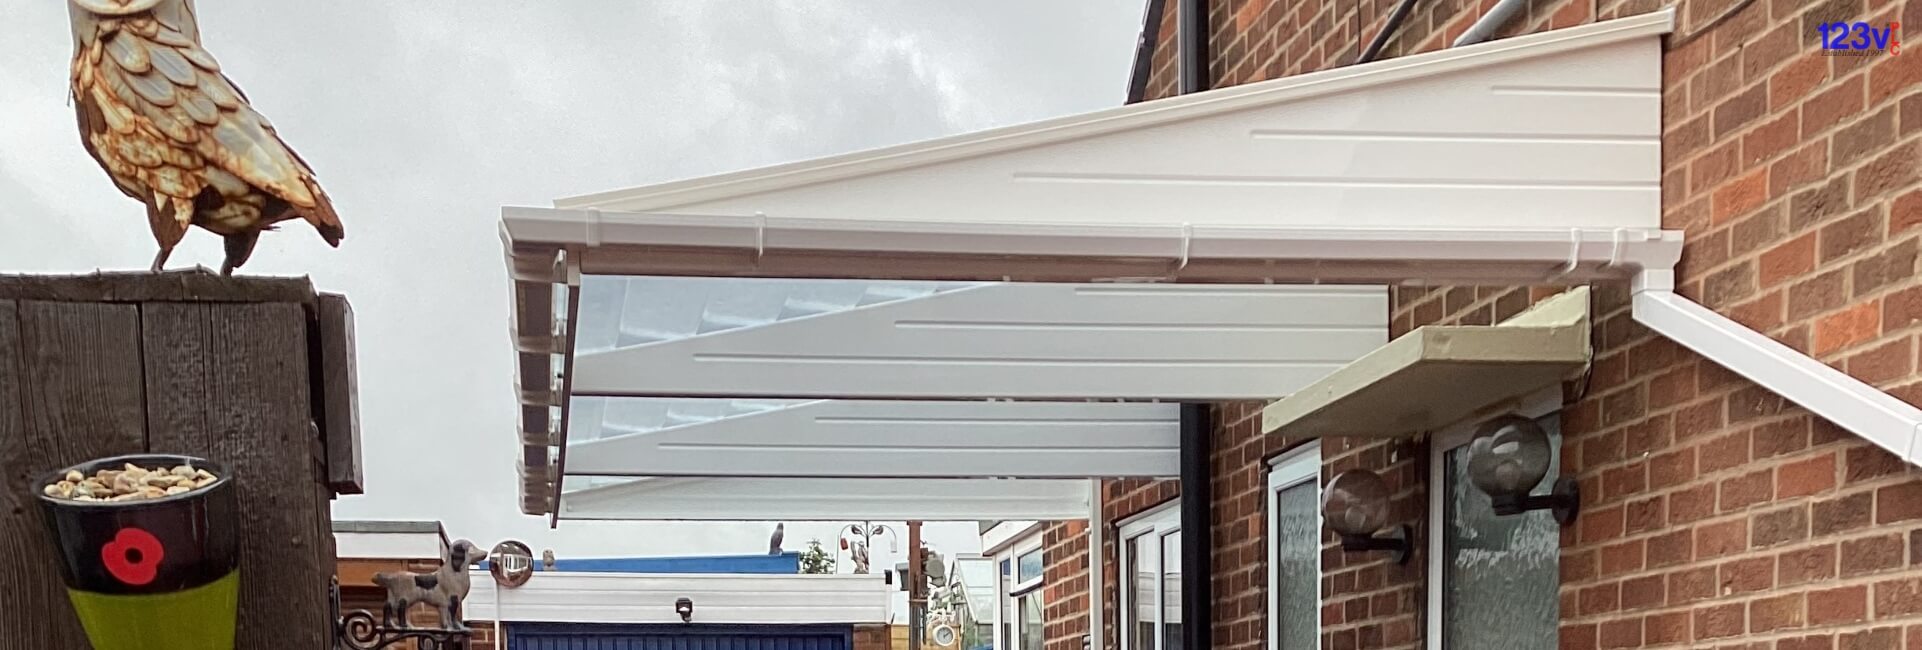 Cantilever Car Canopy in white